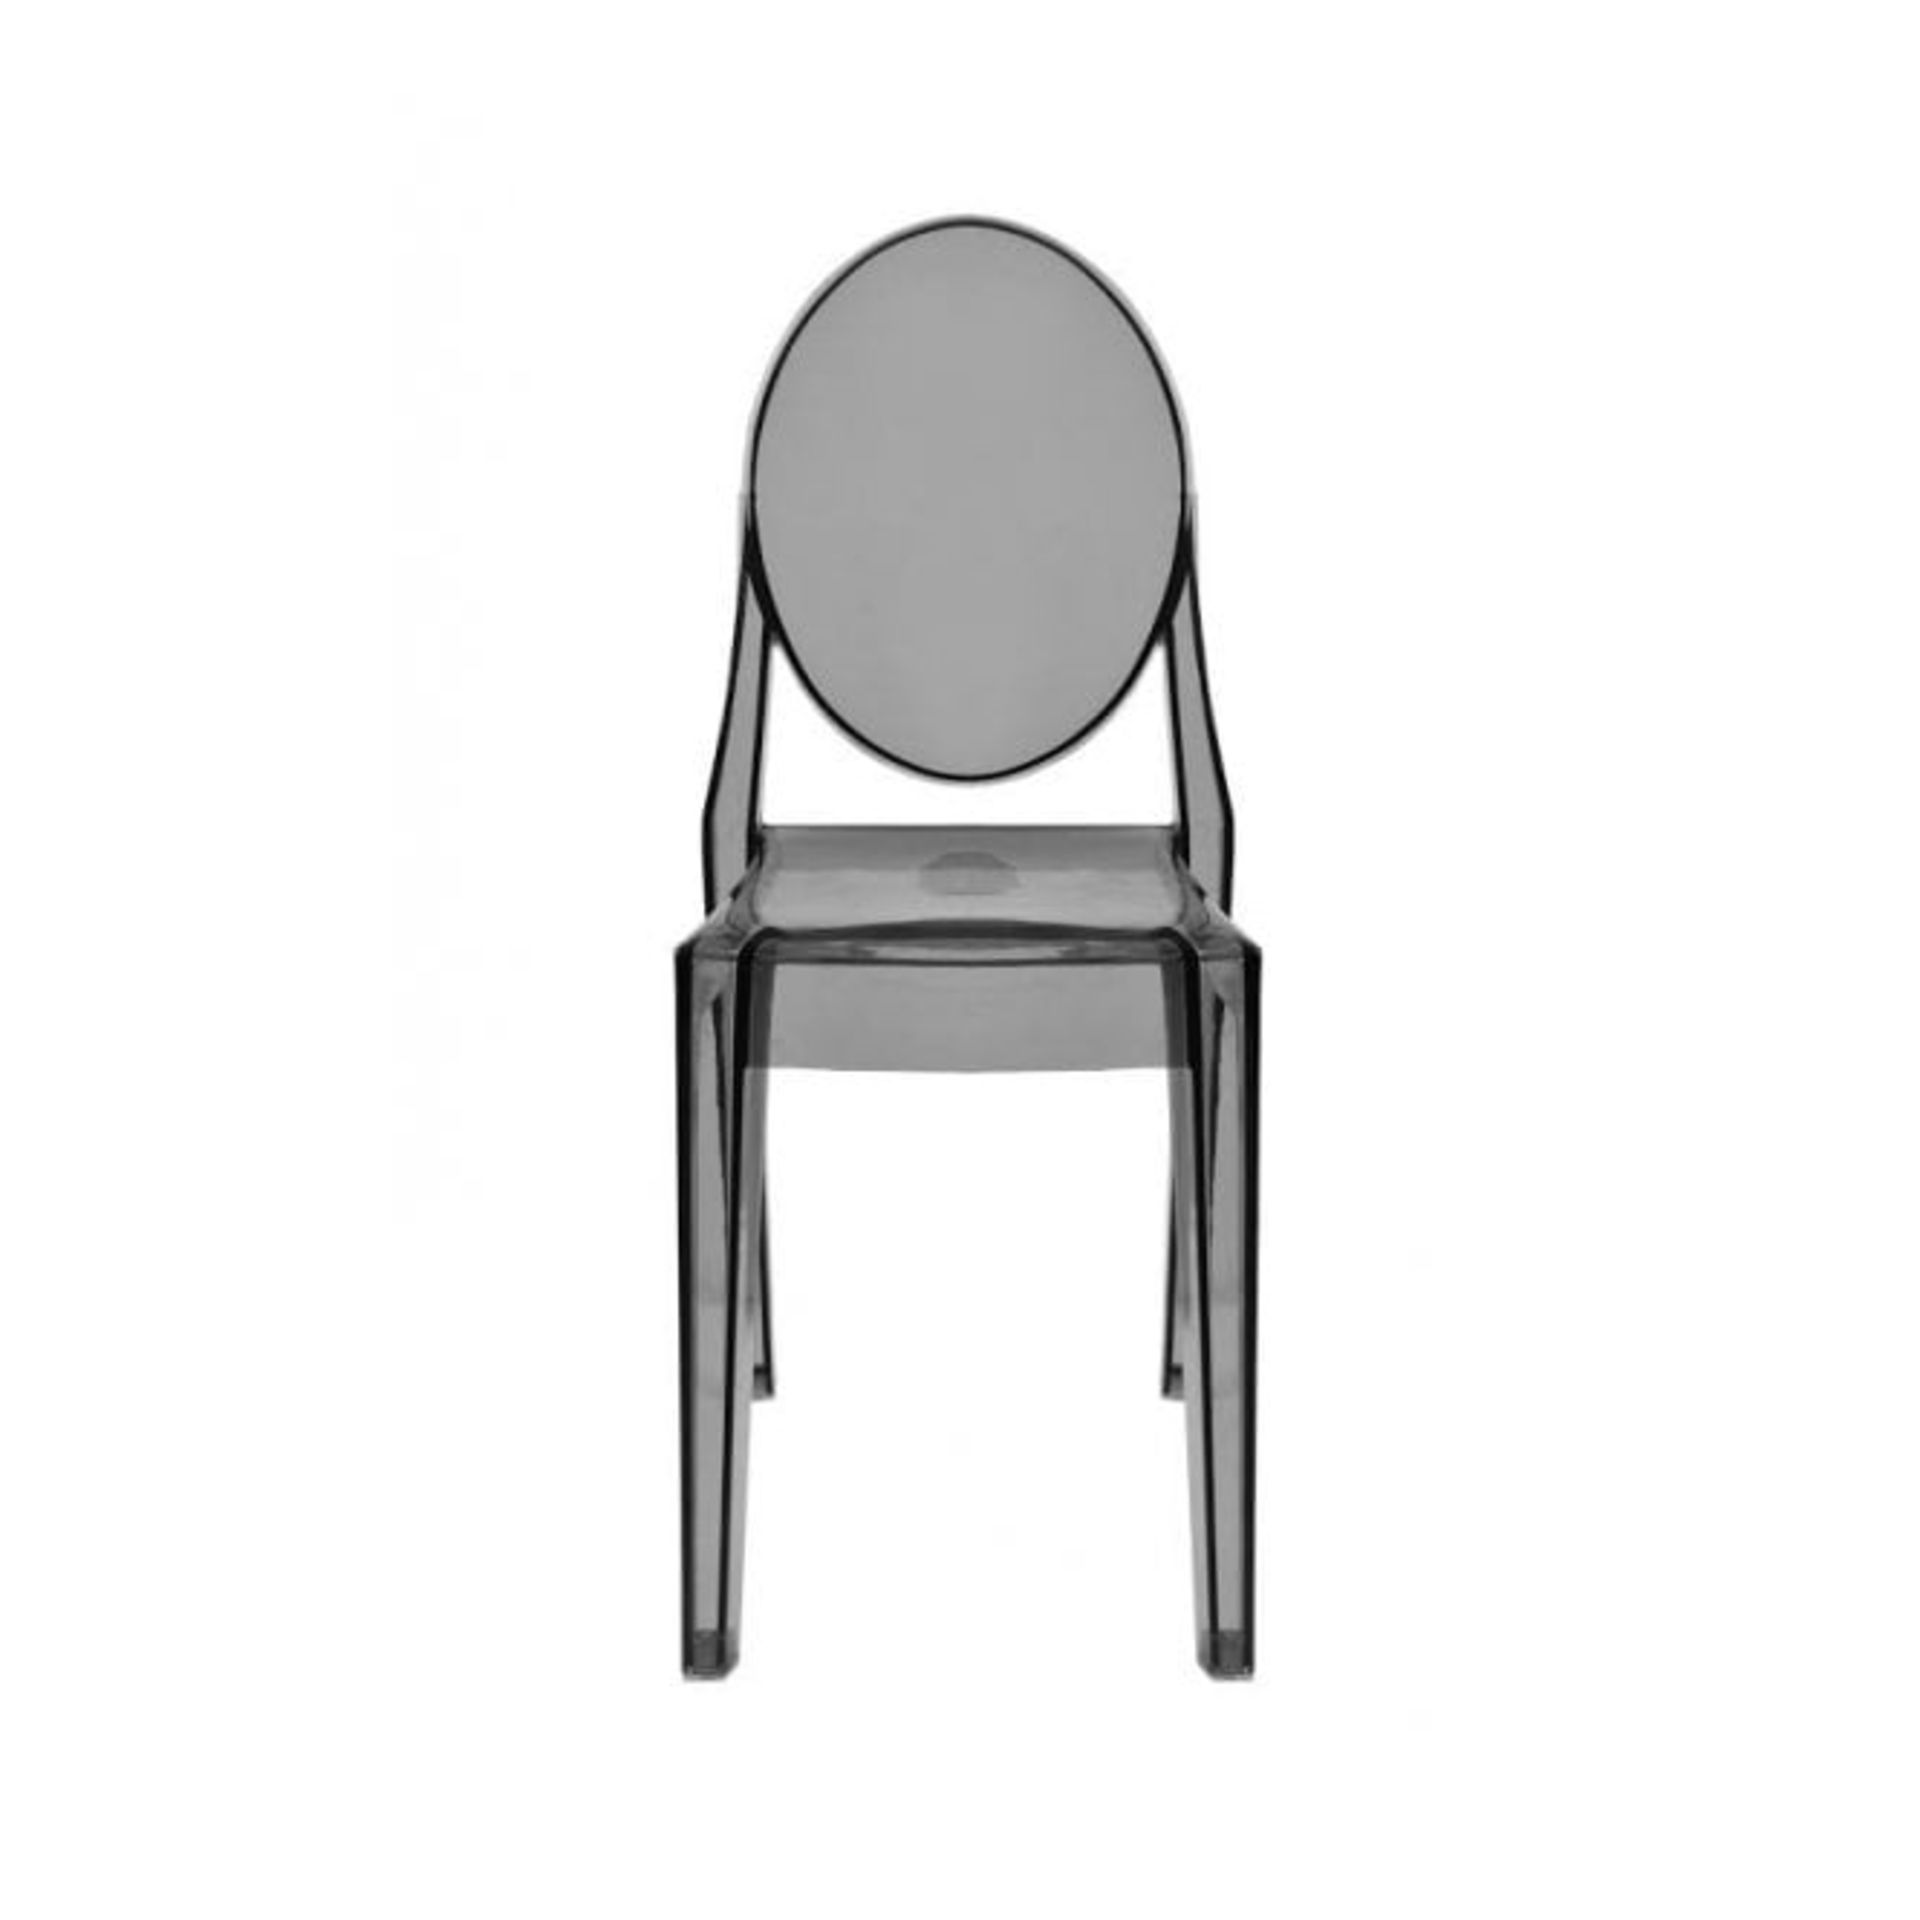 6 x Brand New Victoria Transparent Smoke Plastic style Ghost Chair influenced by Philippe Starck (